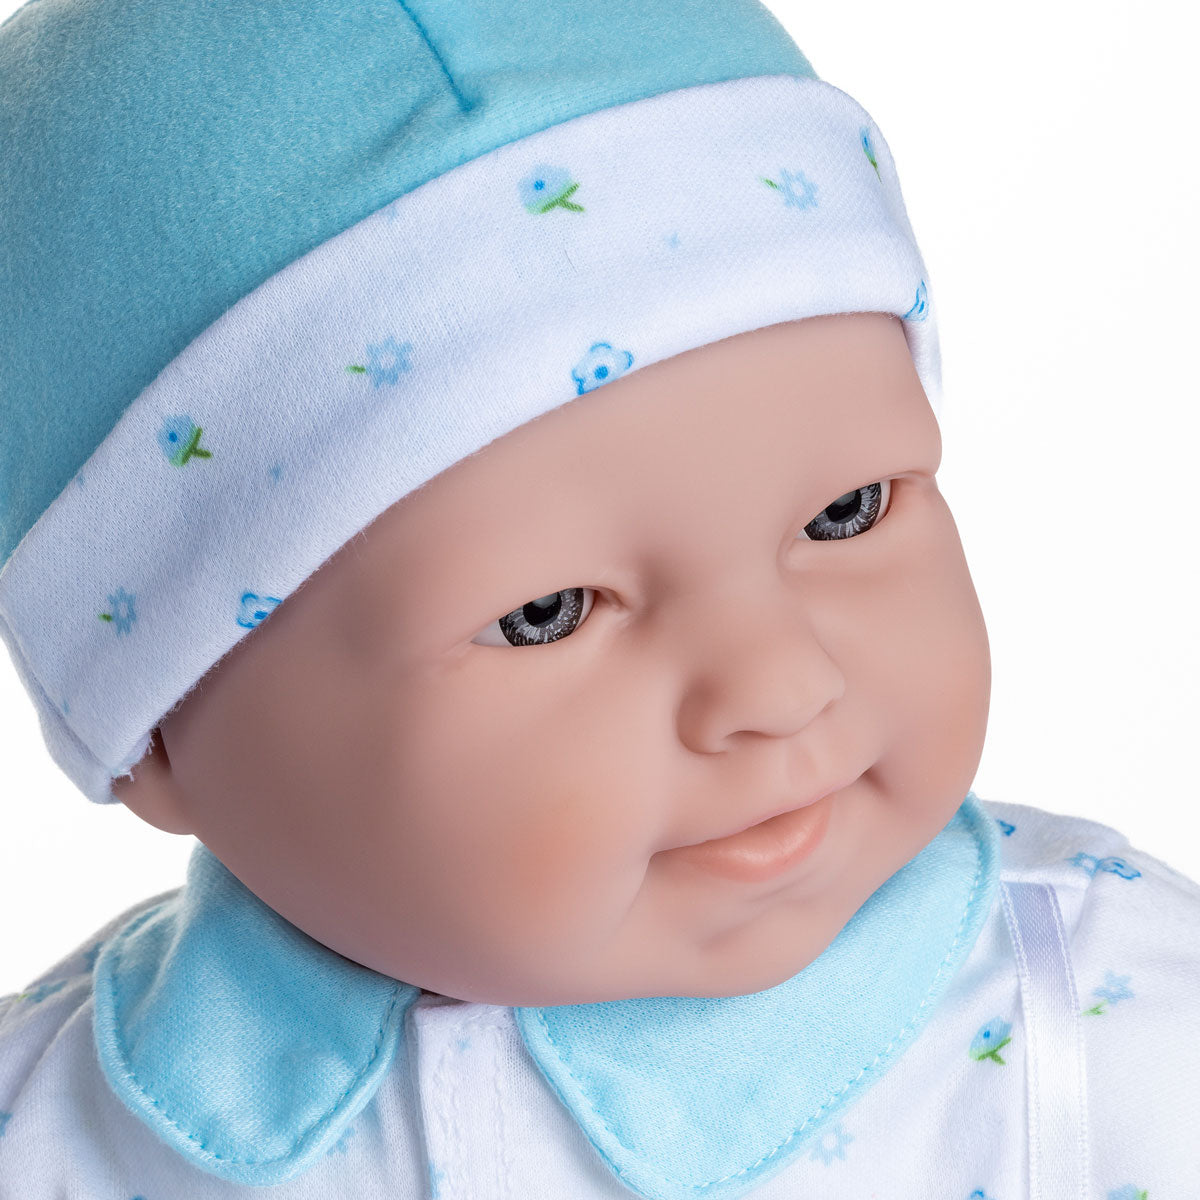 La Baby Play Doll - 20" Soft Body Baby Doll in baby outfit Blue w/ Pacifier